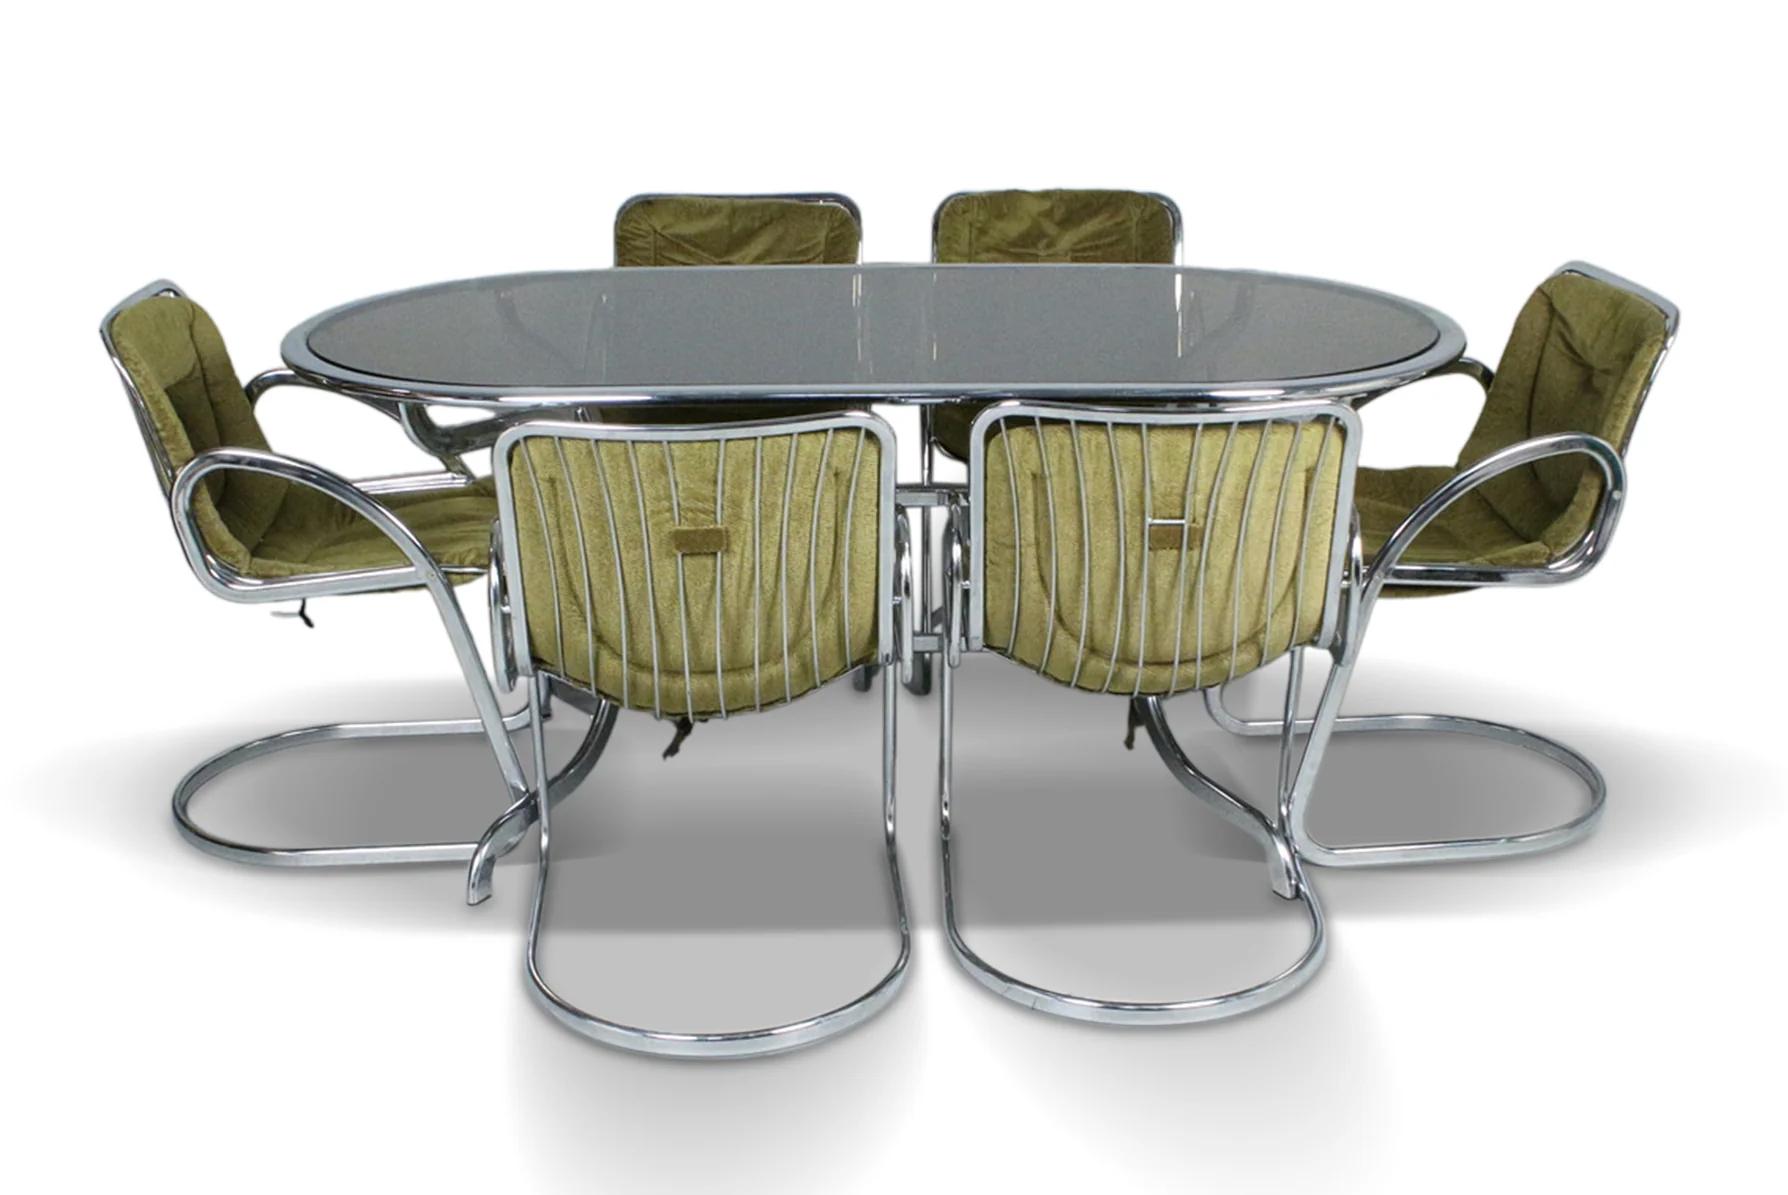 Origin: Italy
Designer: Gastone Rinaldi
Manufacturer: Rima
Era: 1970s
Materials: Chrome, Glass
Measurements: 66 (table) 19.5 (chairs)″ wide x 29 (table) 20 (chairs)″ deep x 29 (table) 31 (chairs)″ tall

Condition: In excellent original condition